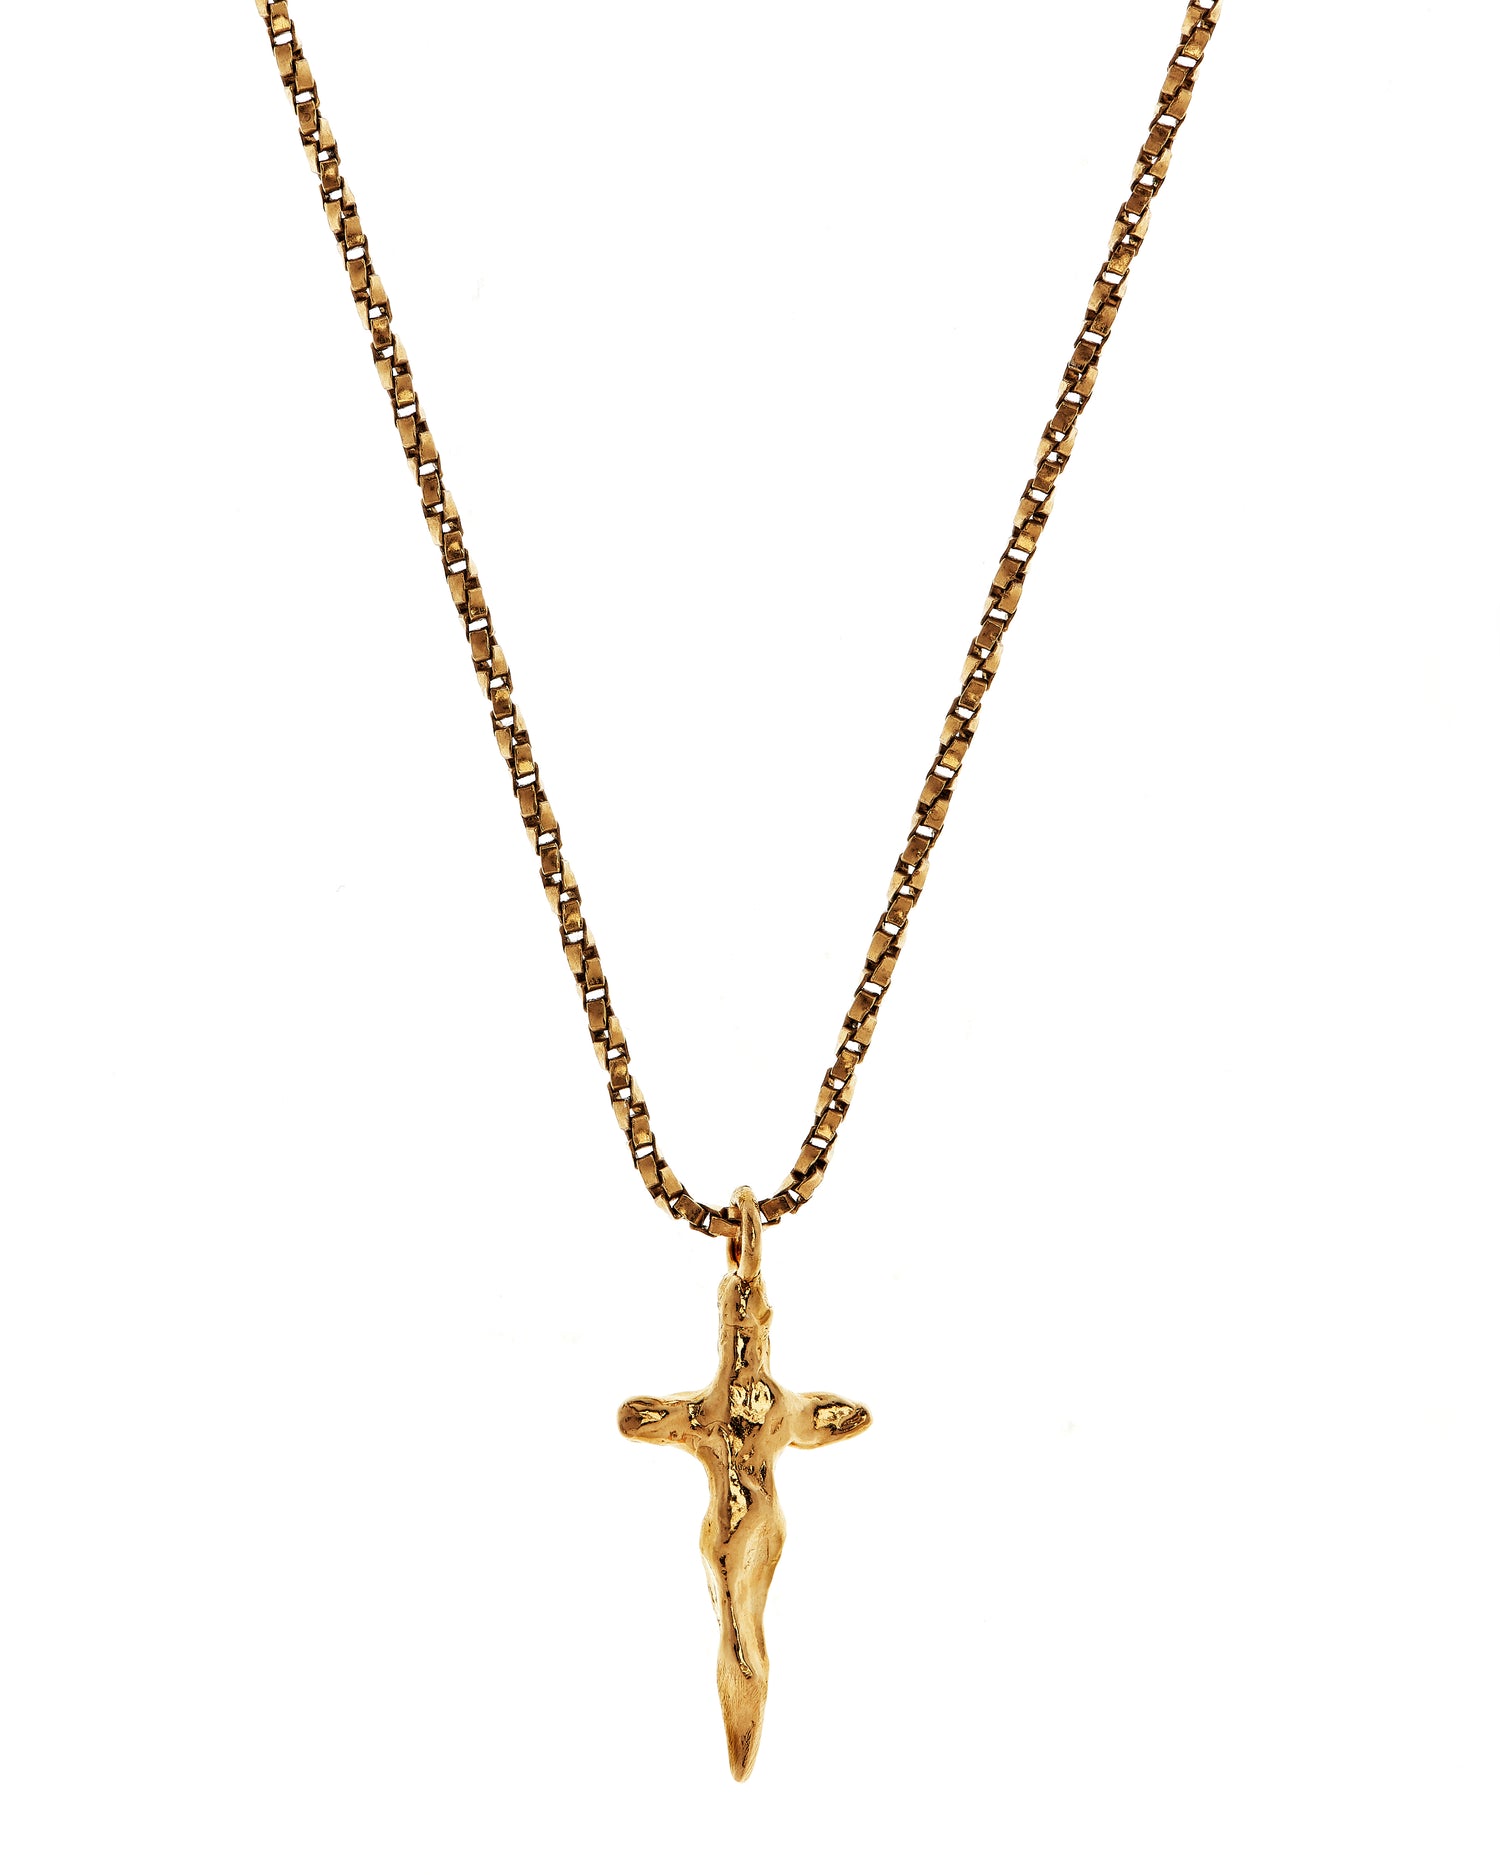 Back view of crucifix necklace in gold